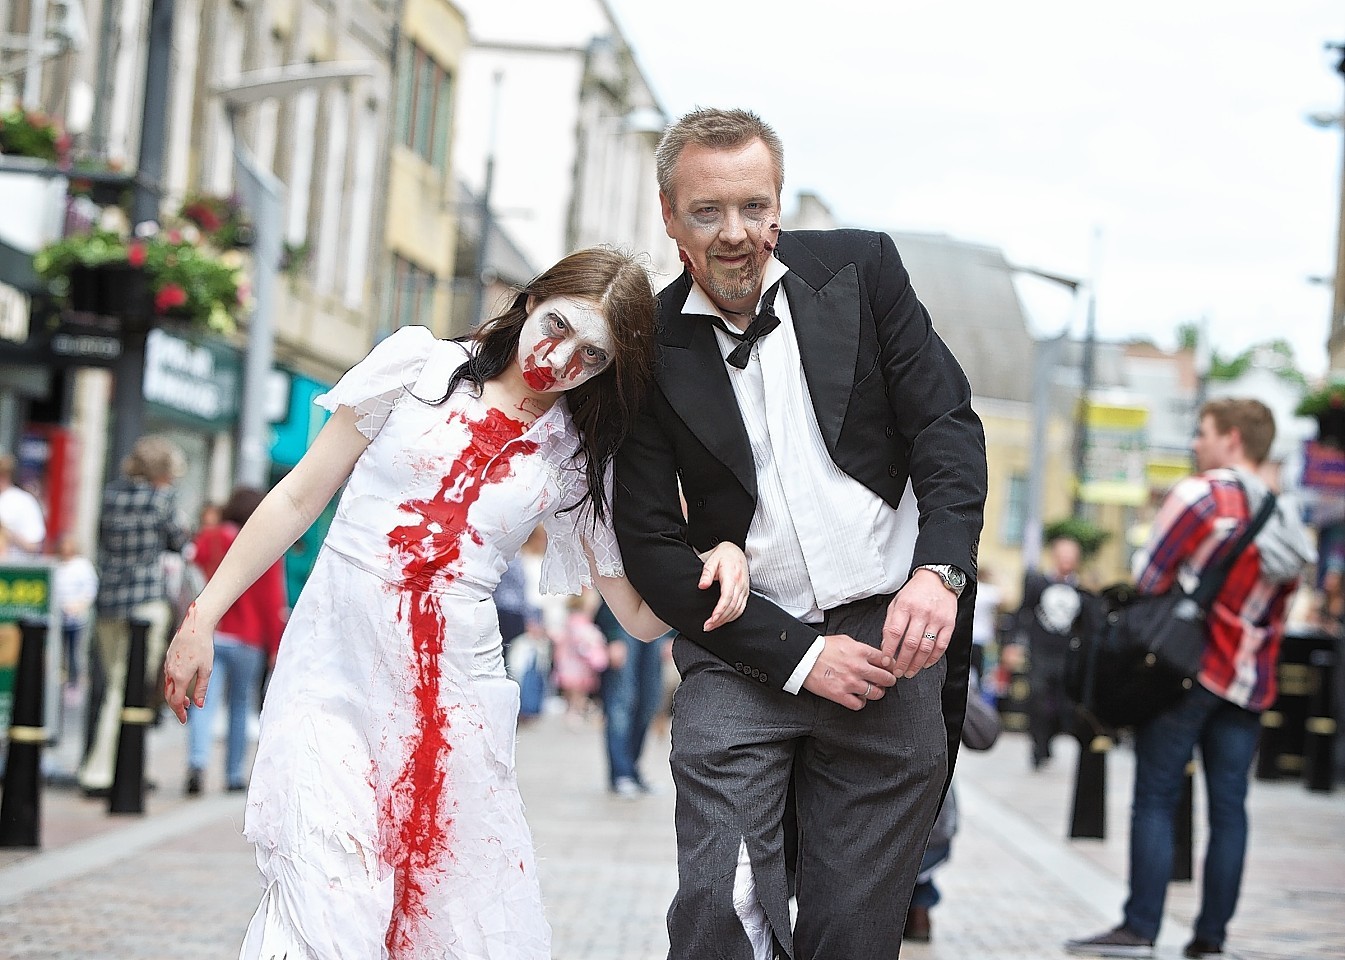 Costumed "zombies" in Inverness in 2015